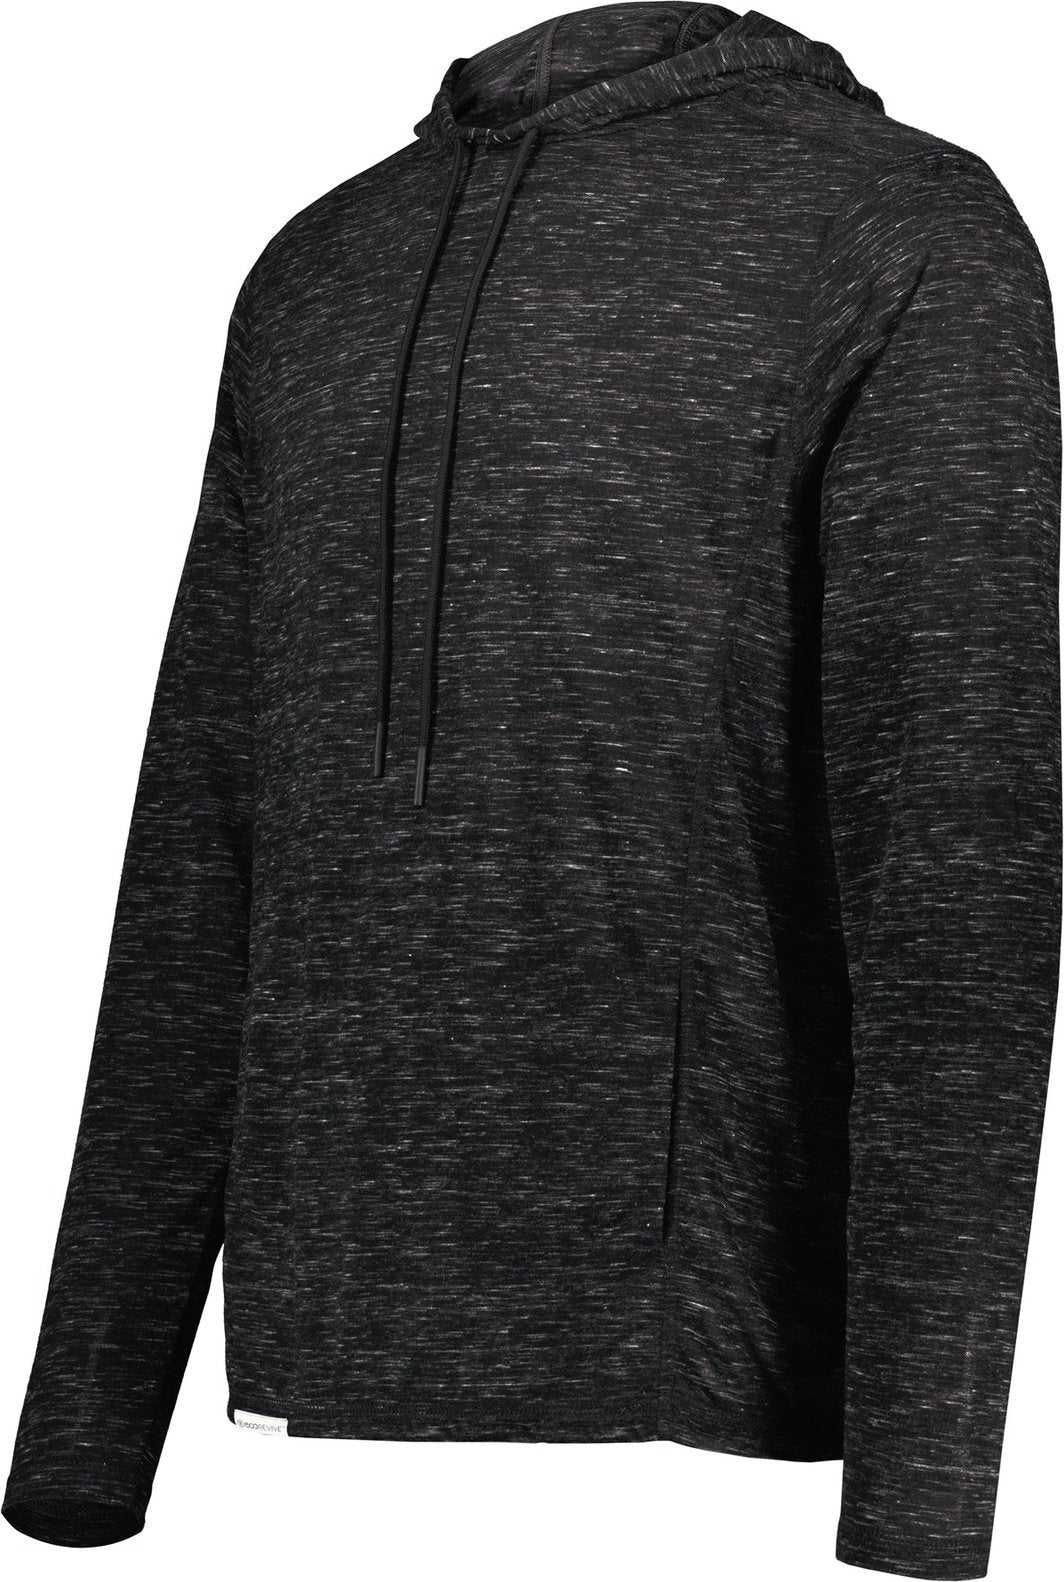 Holloway 222745 Monterey Hoodie - Black Heather - HIT a Double